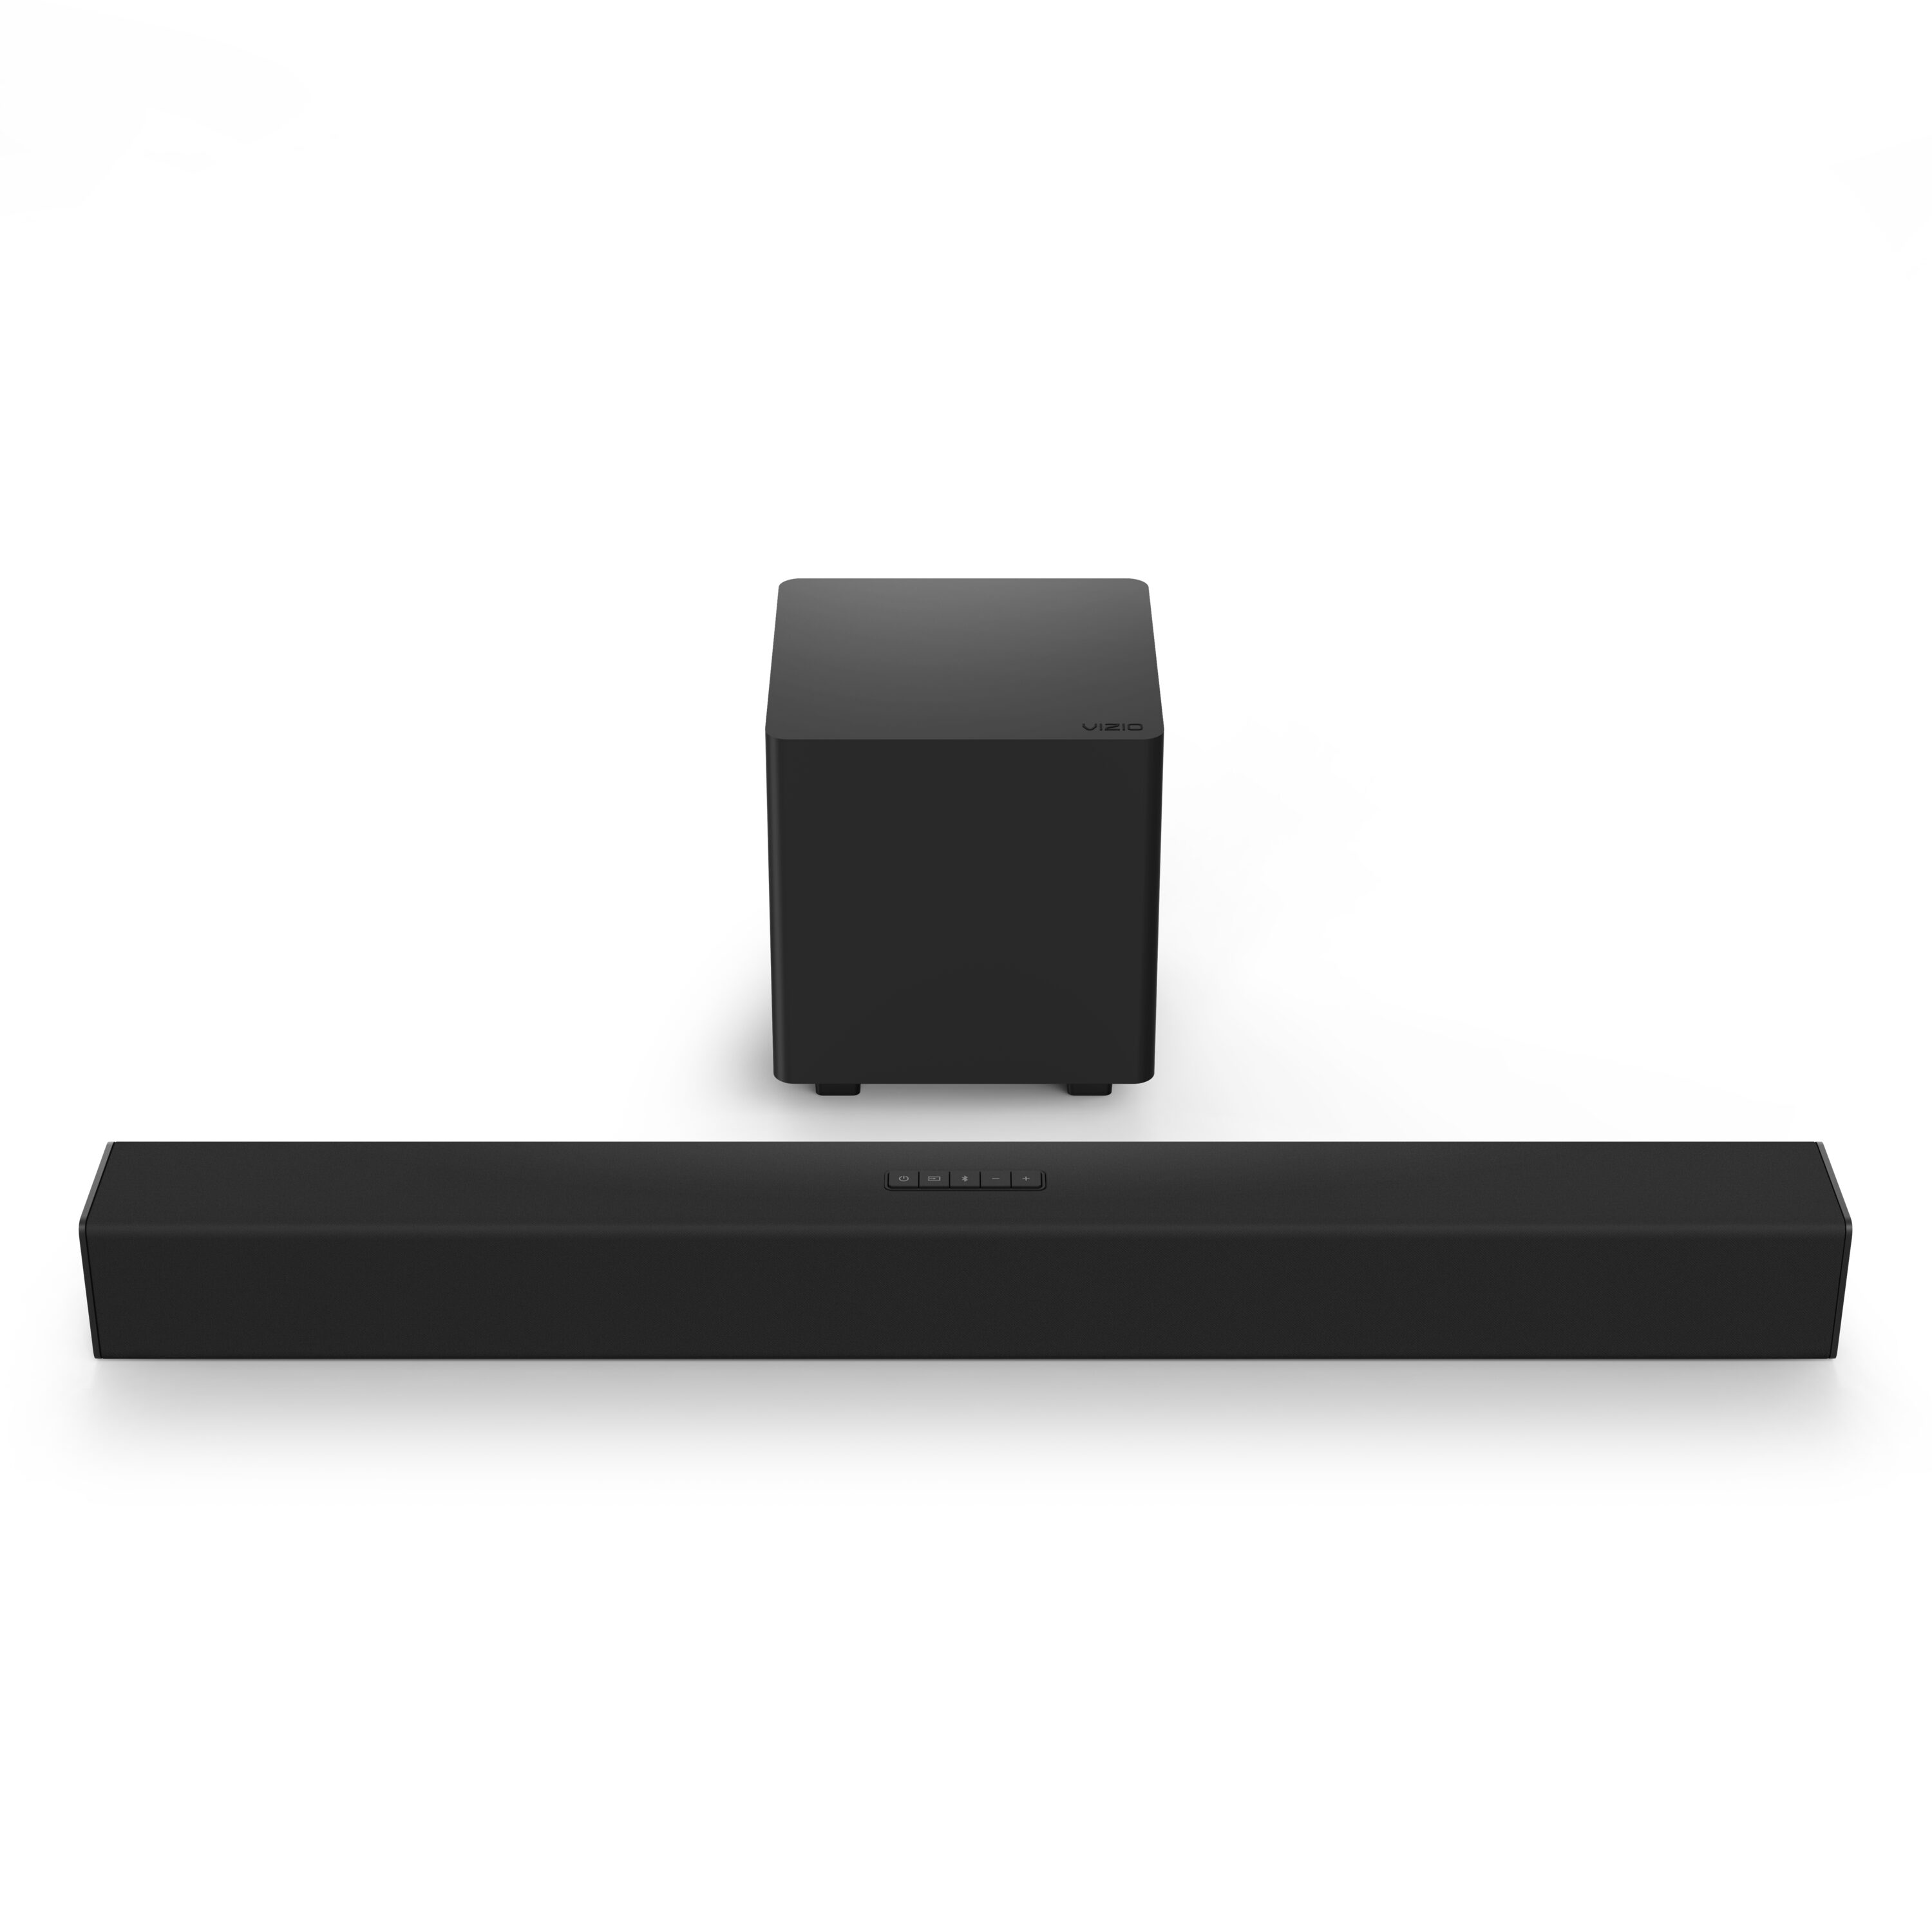 VIZIO 2.1 Home Theater Sound Bar with DTS Virtual:X, Wireless Subwoofer SB3221n-J6 - image 1 of 9